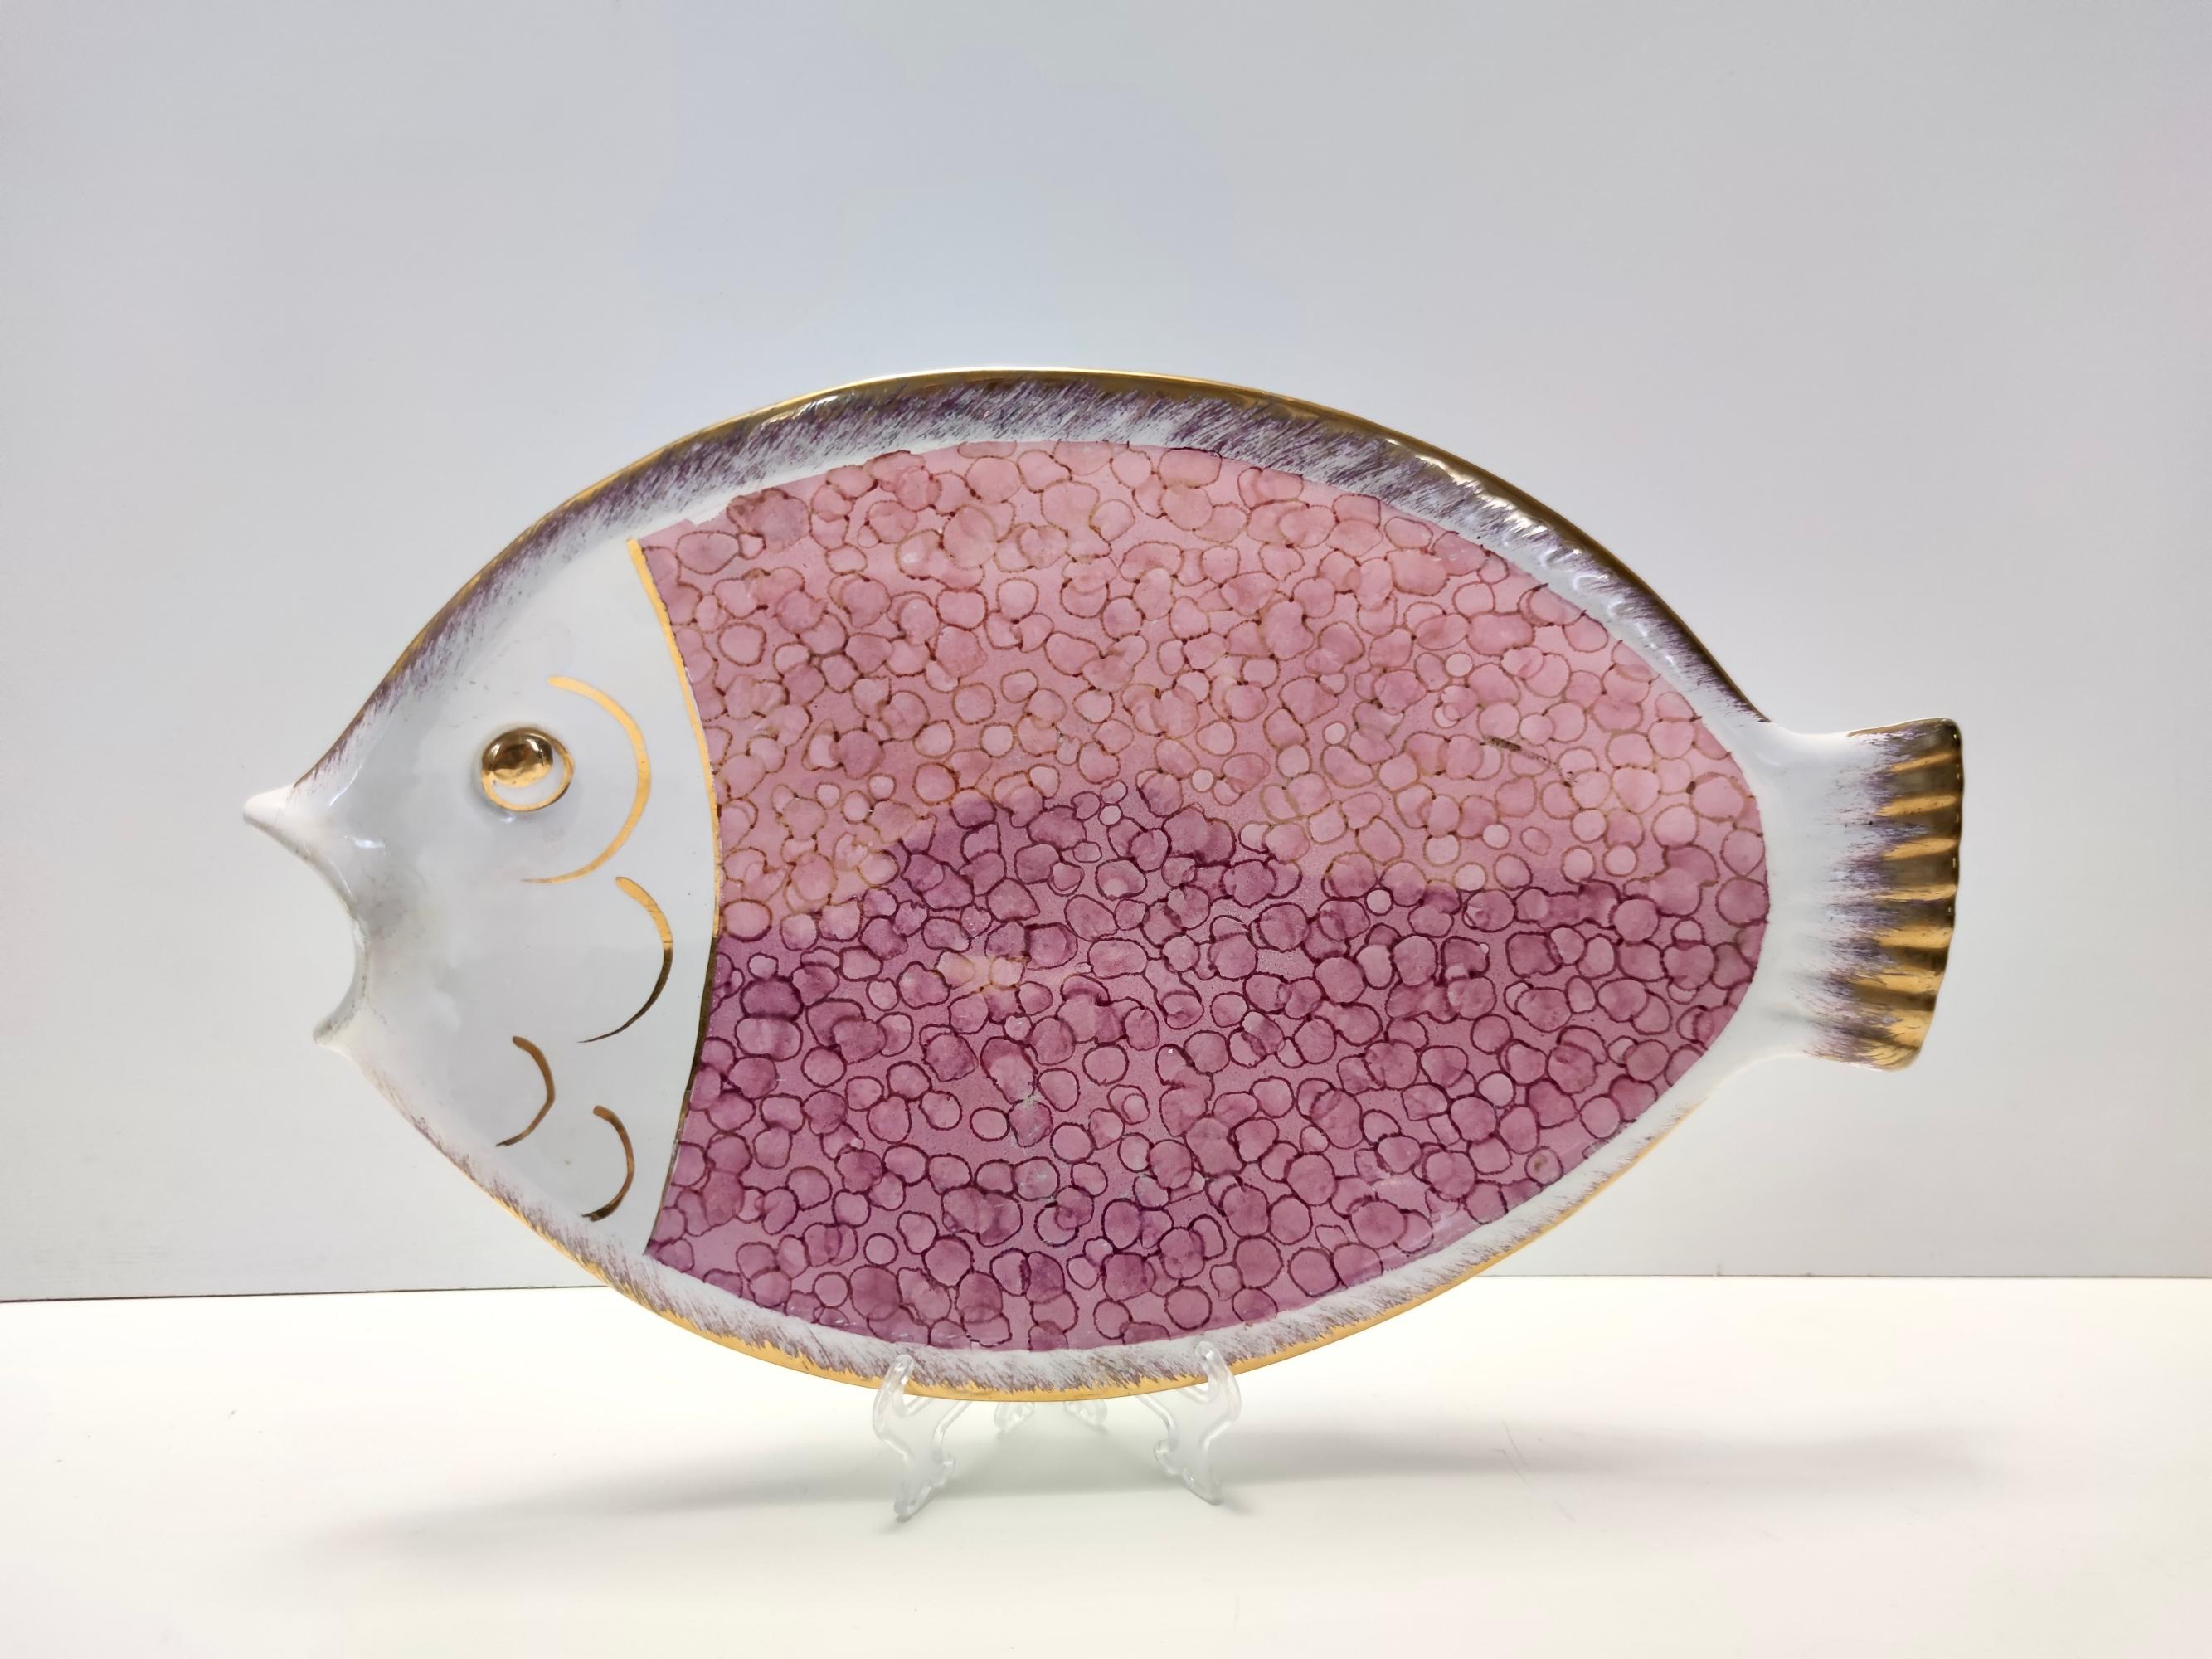 Glazed Vintage Large Ceramic Pink Fish Vide-Poche / Decorative Plate by Rometti, Italy For Sale